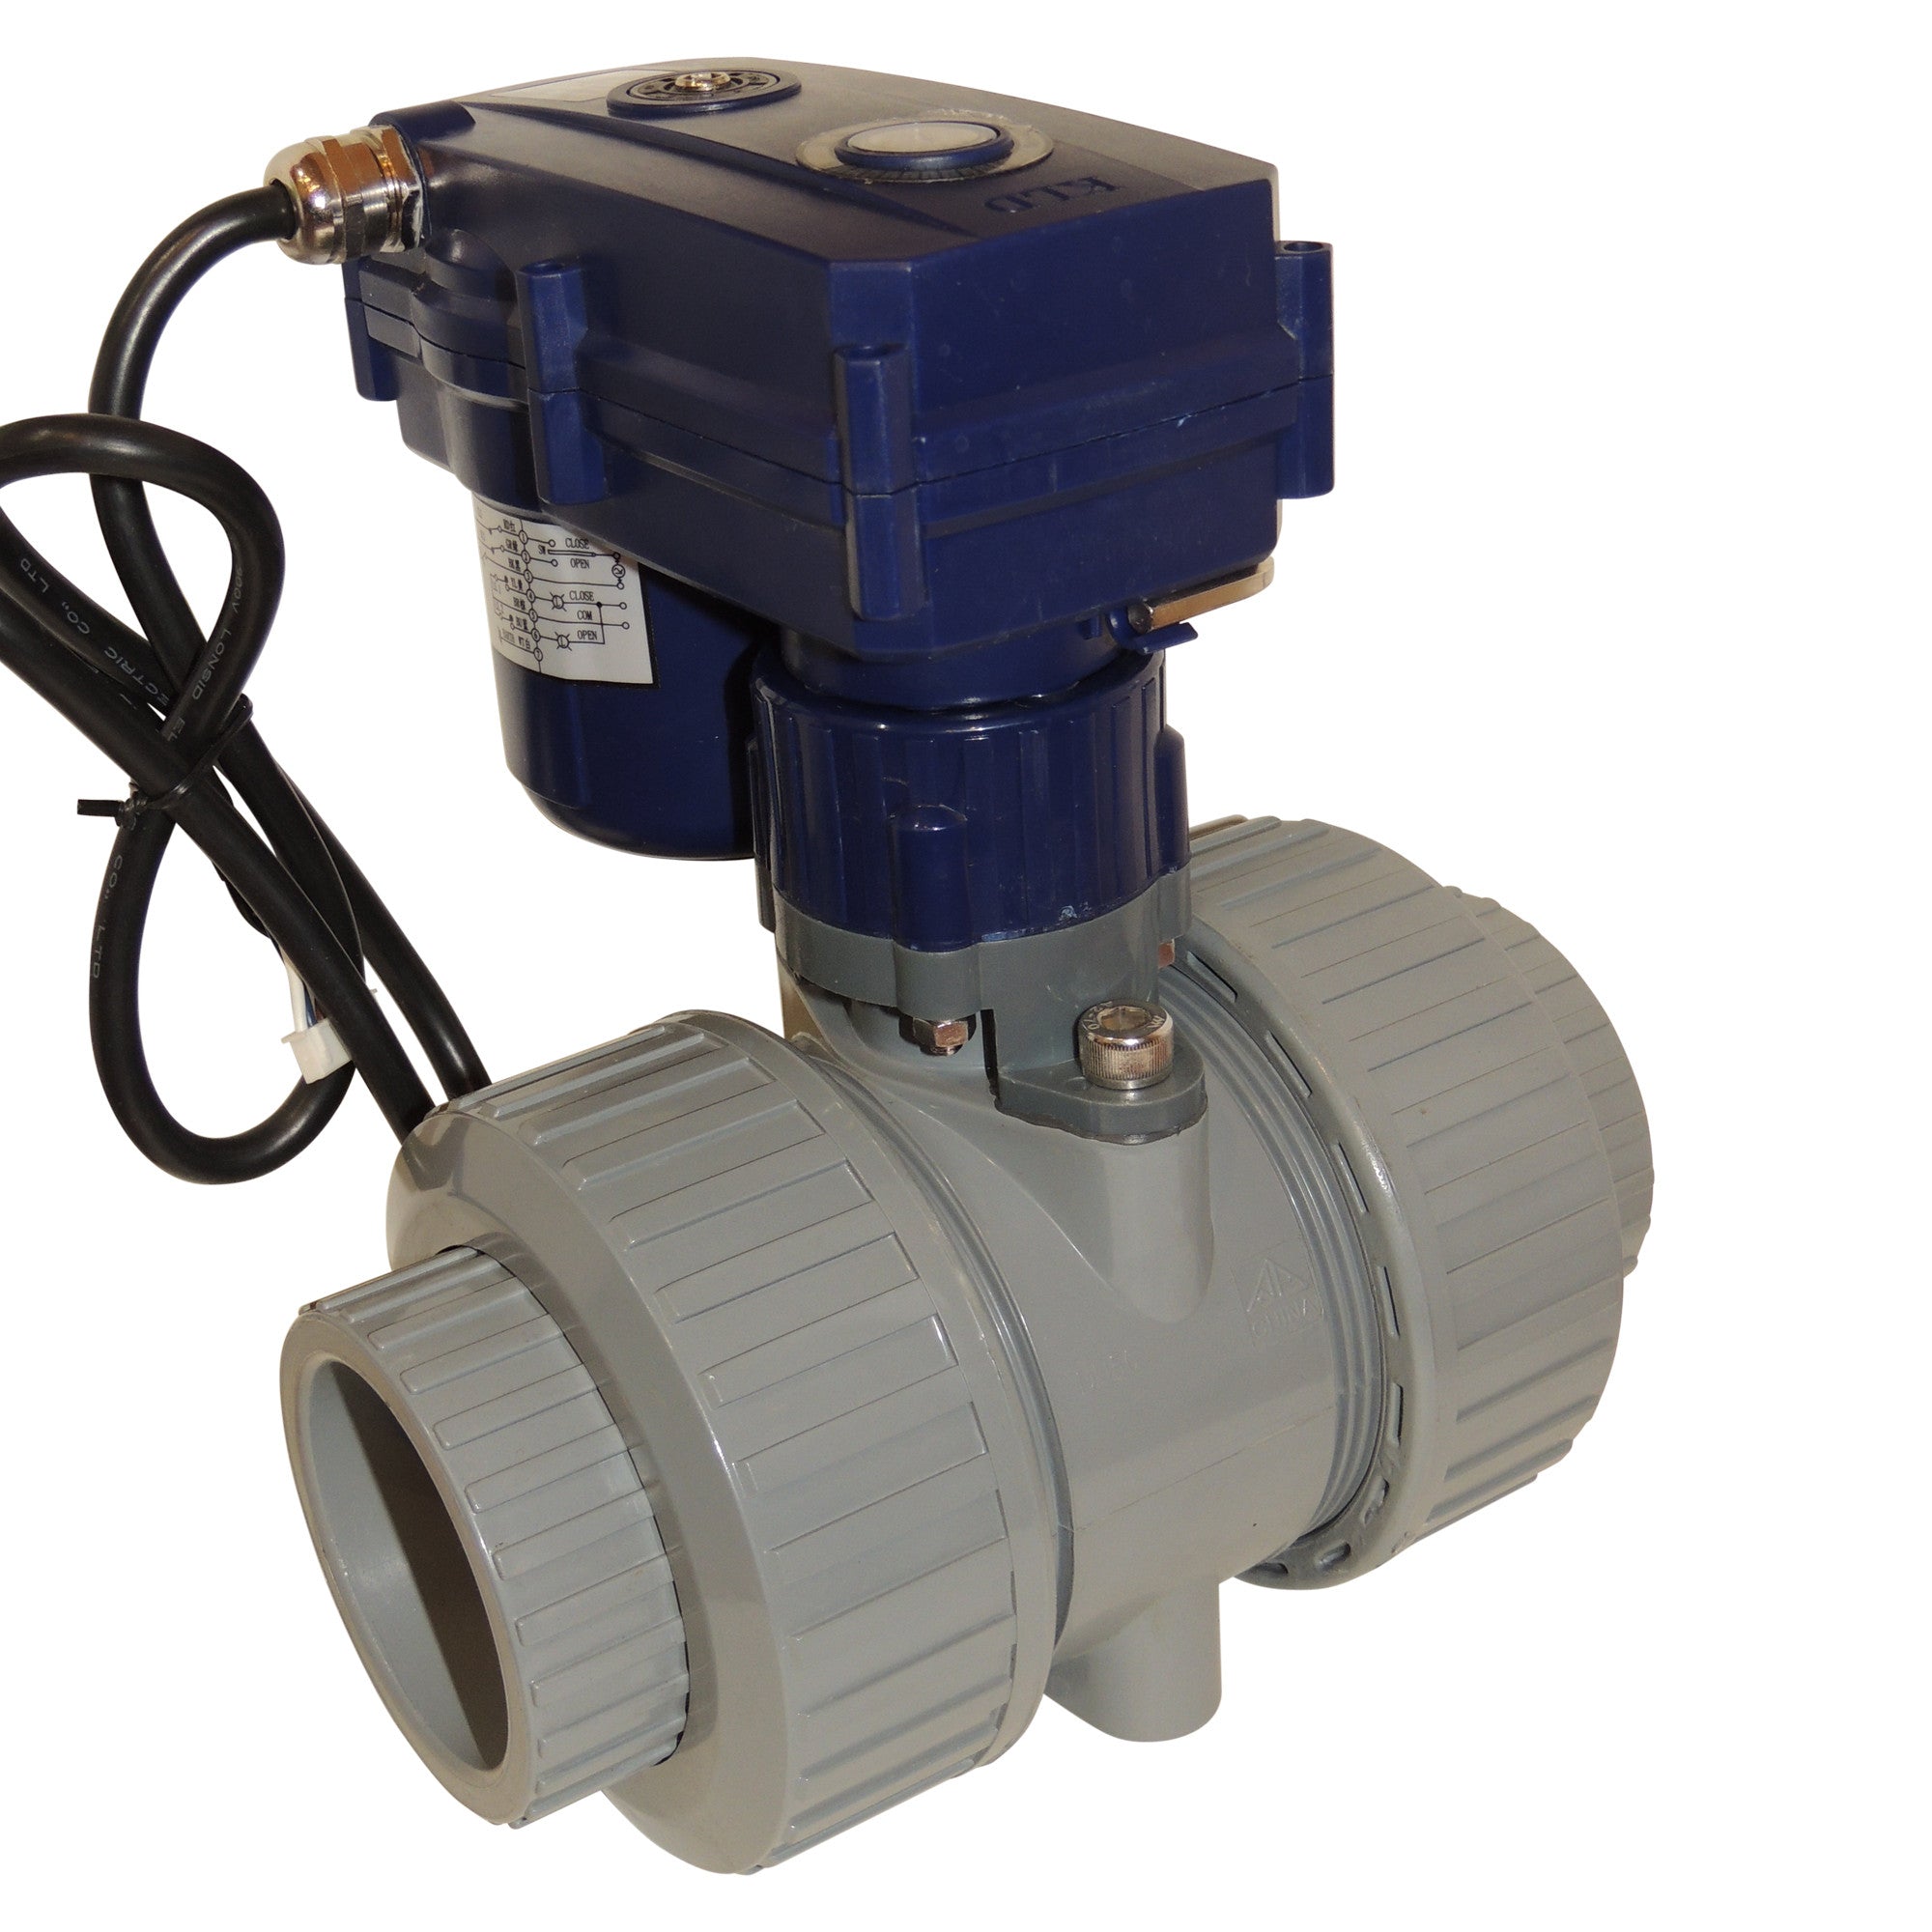 Using Control Valves To Optimize Cooling Water System Efficiency